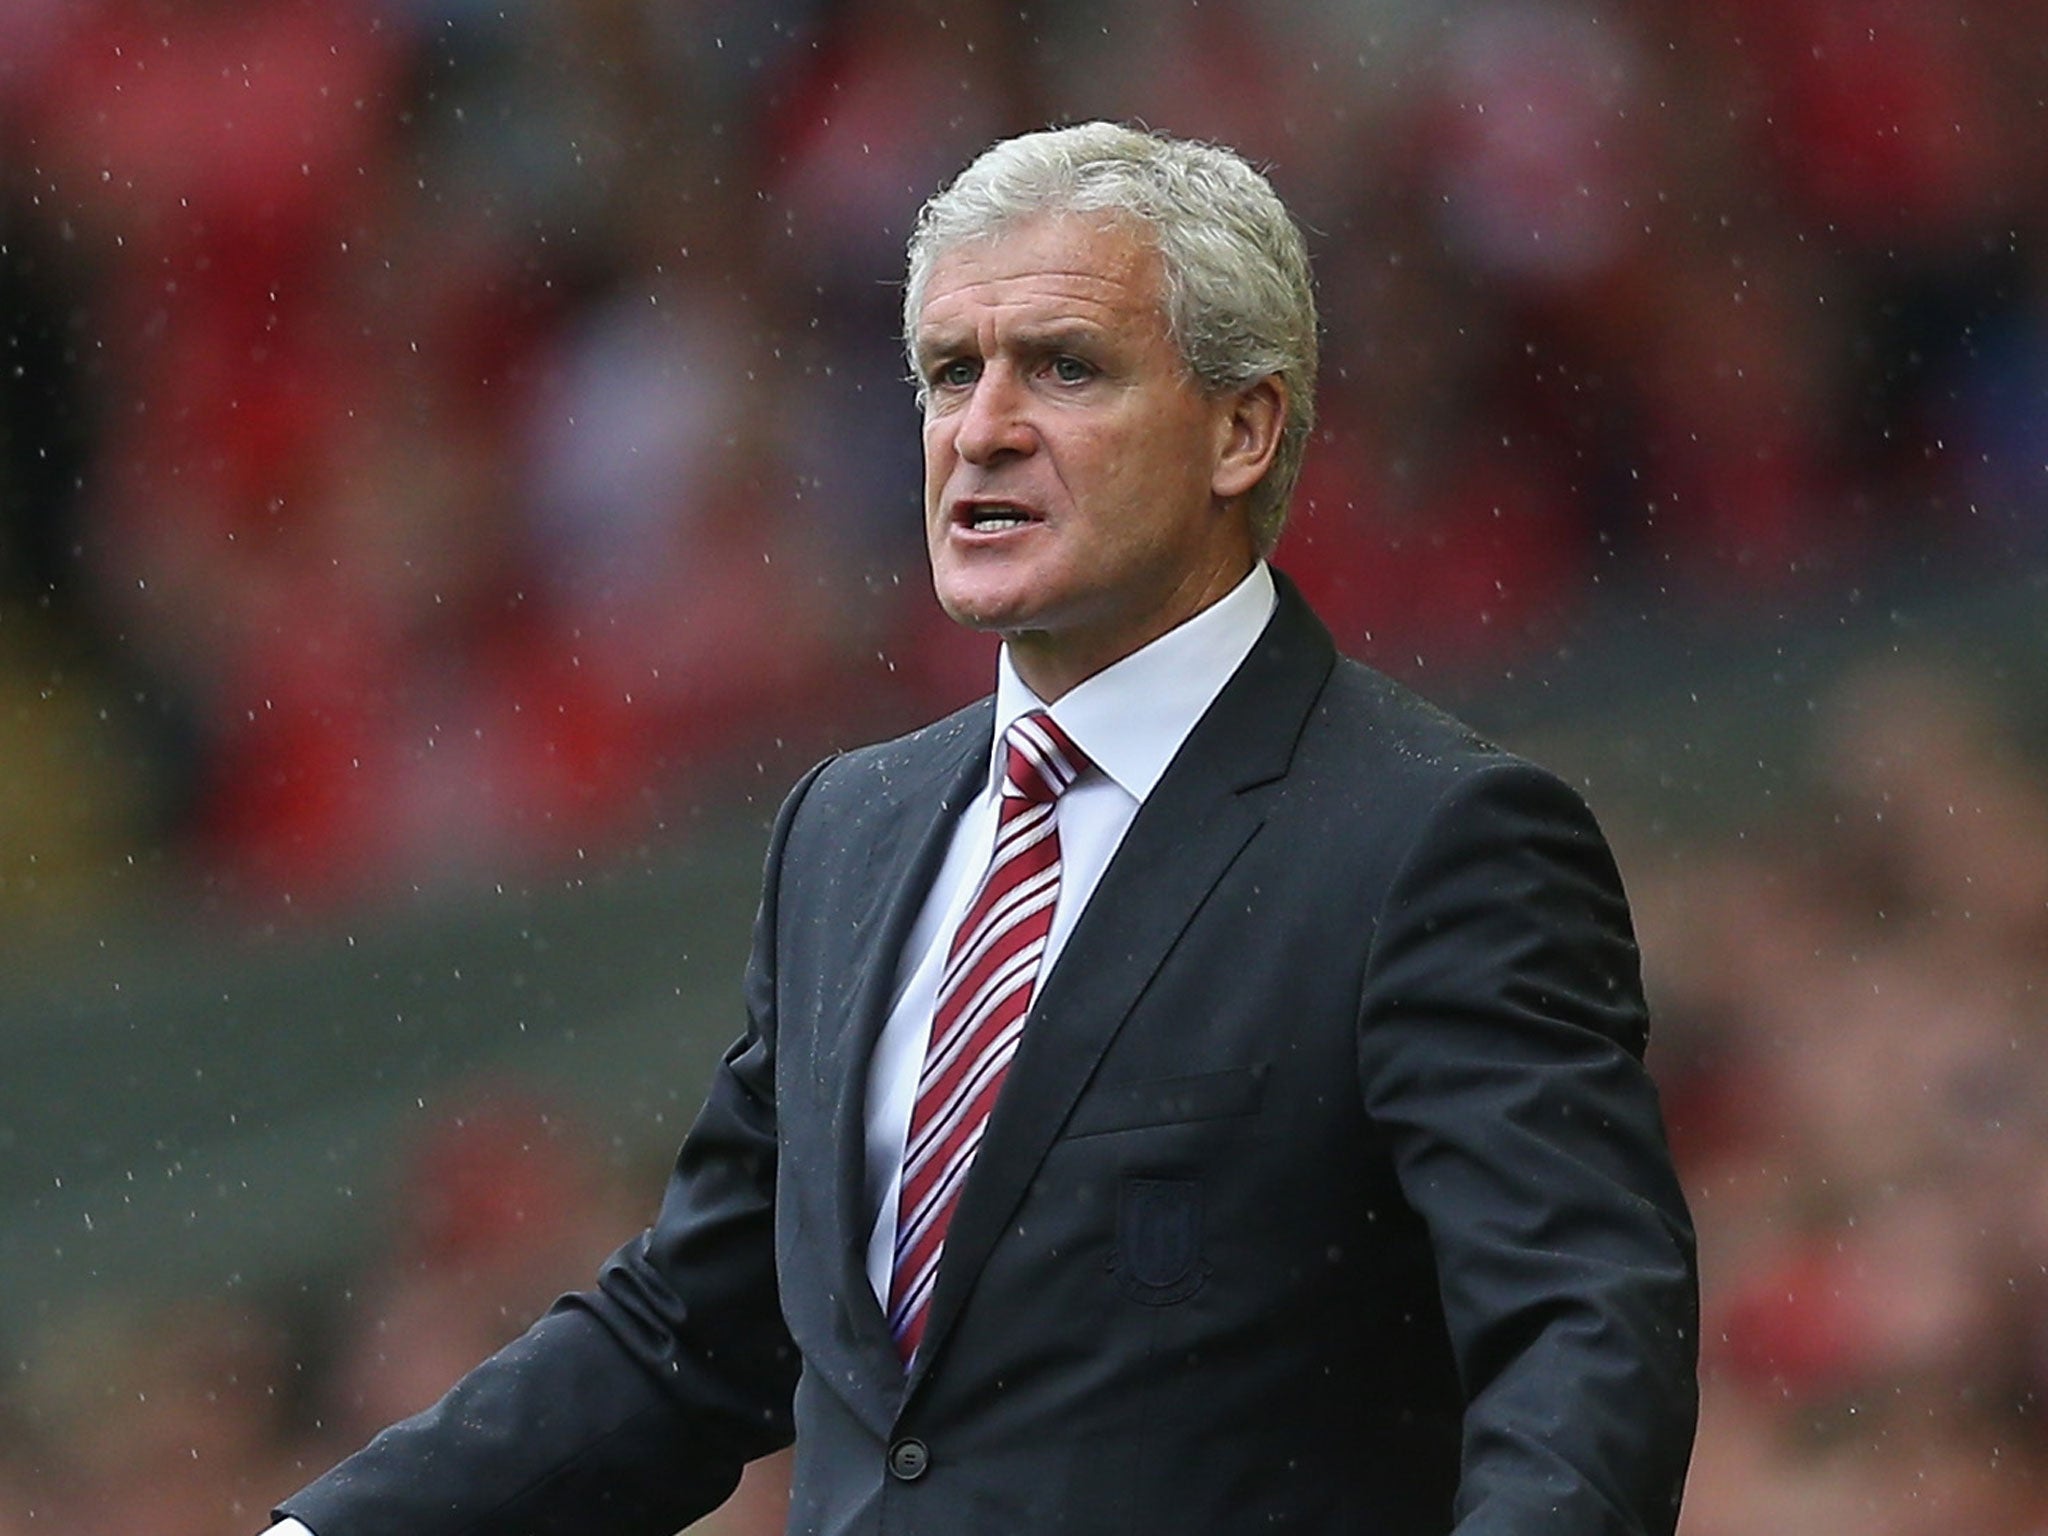 Stoke City, managed by Mark Hughes, take on Manchester City at the Britannia Stadium